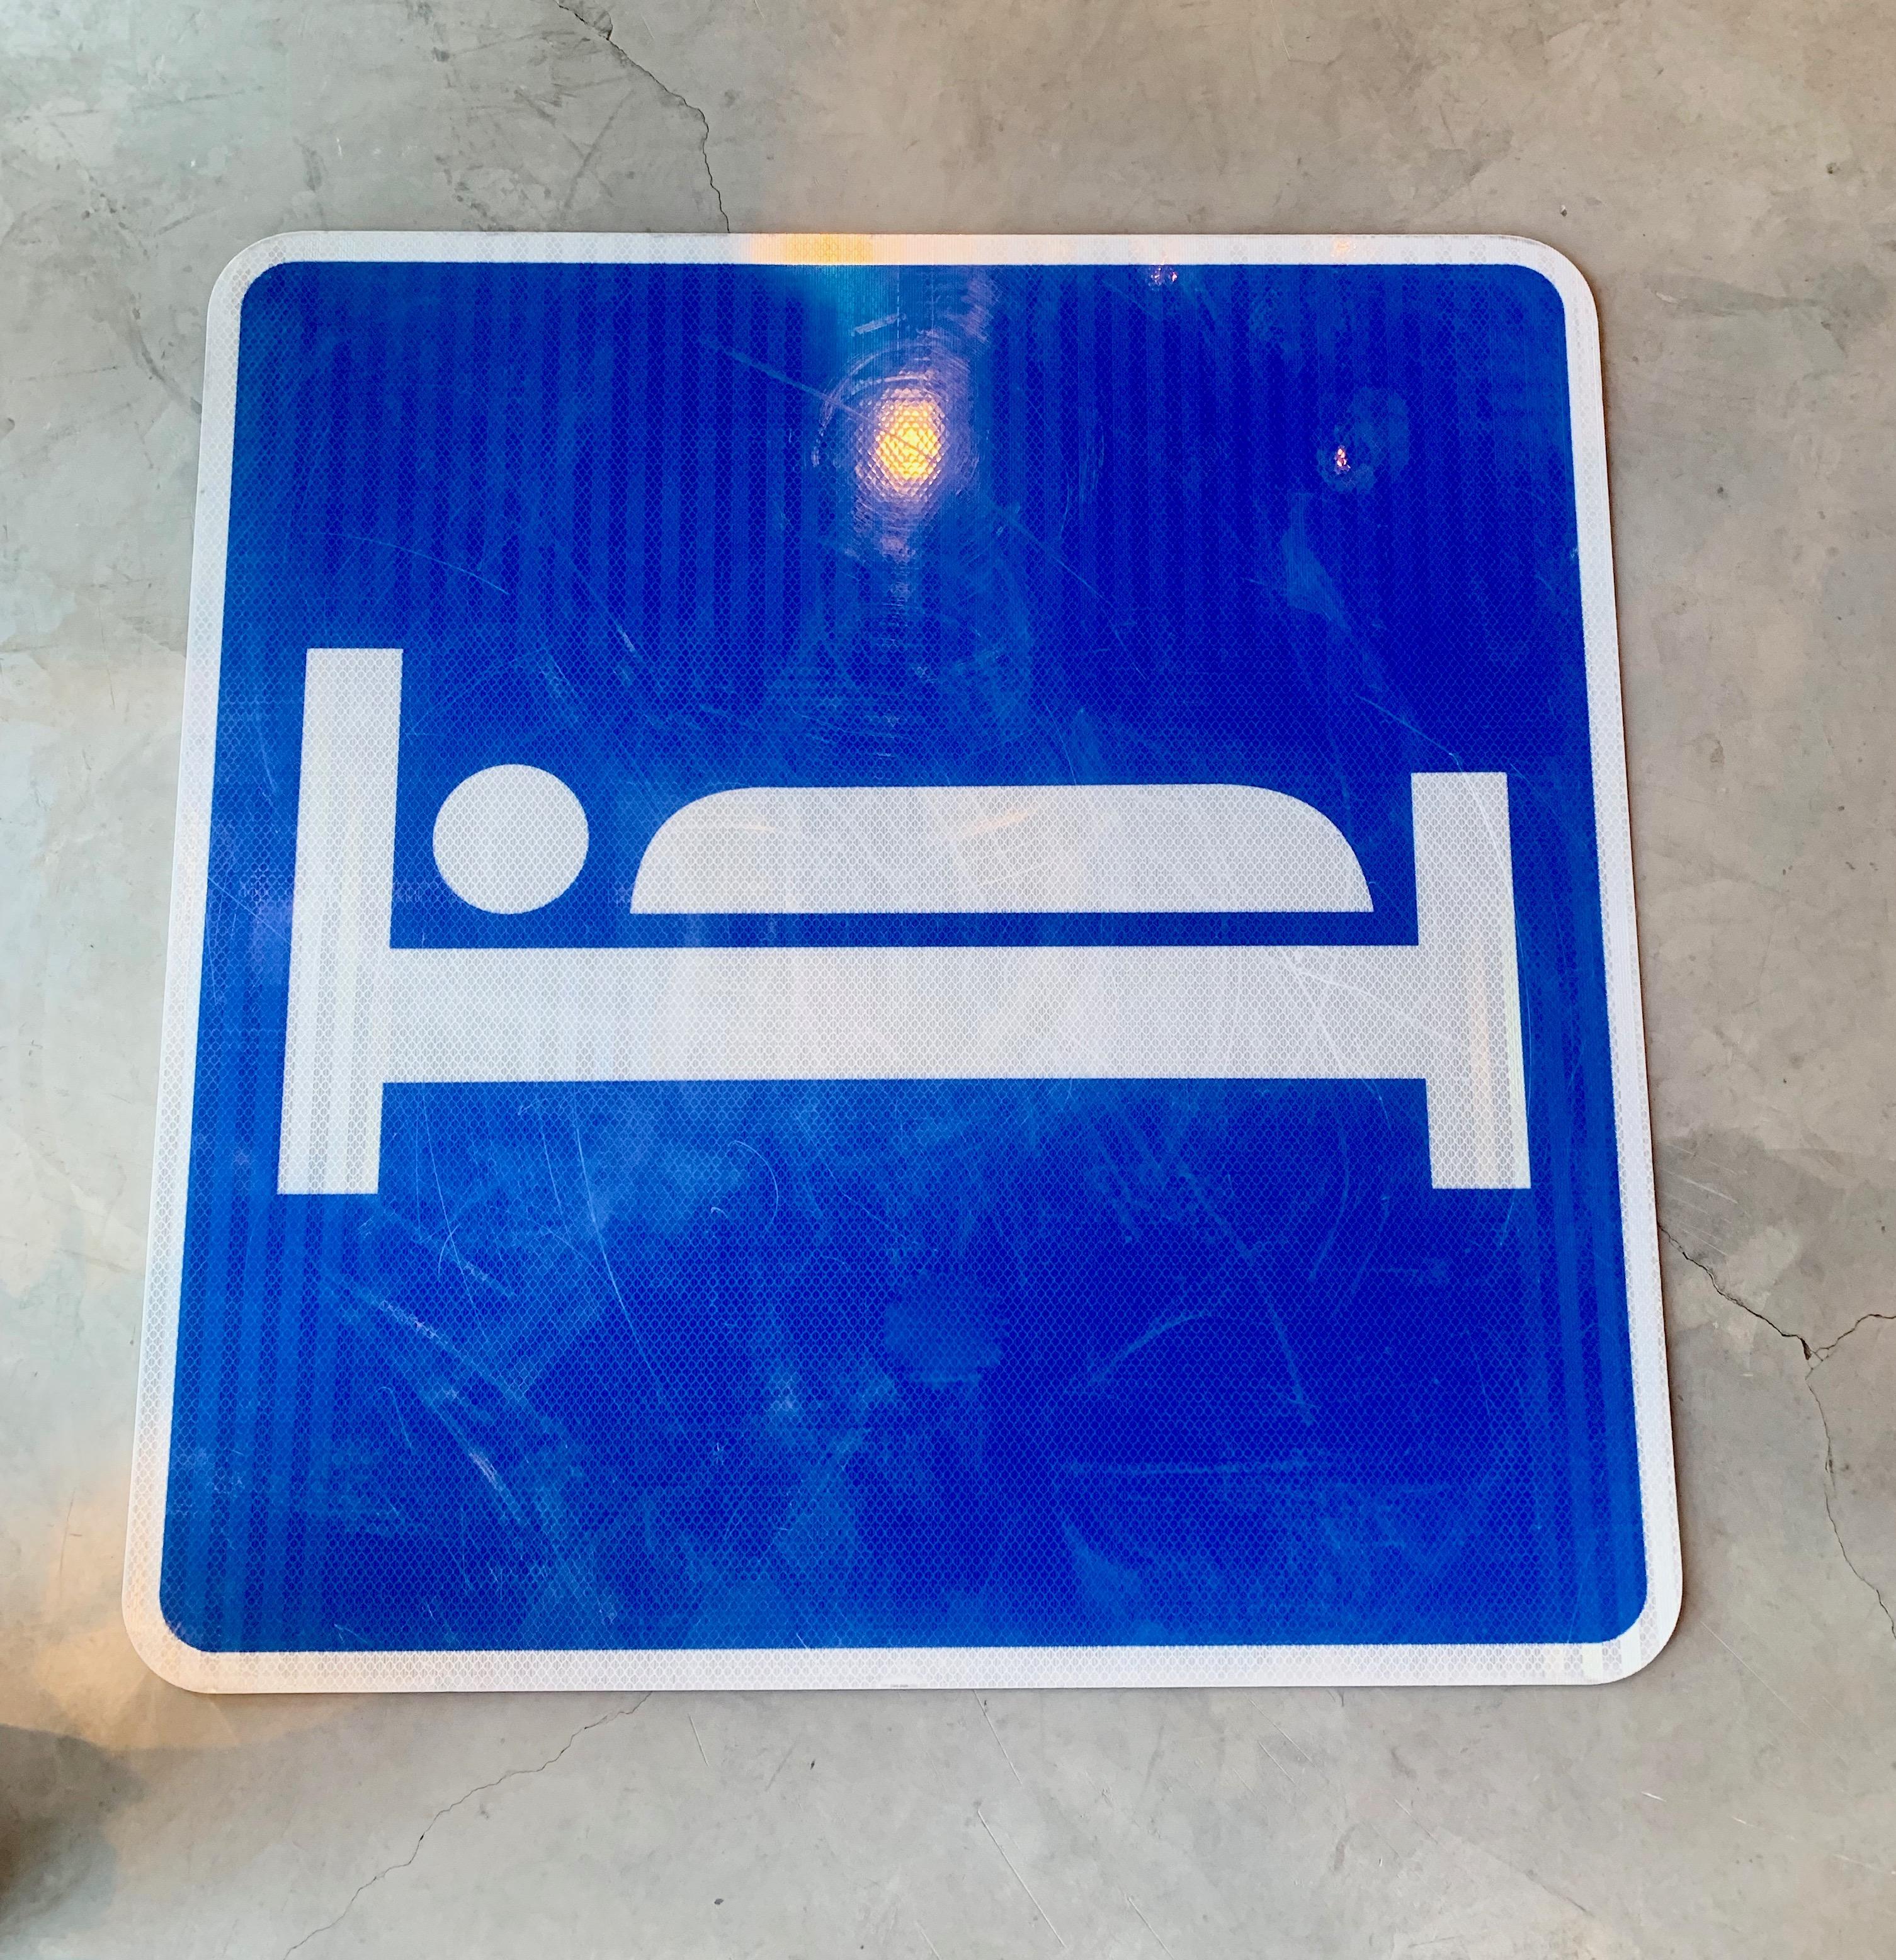 Cool vintage highway sign in cobalt blue reflective metal. Depicts a person sleeping in bed. Sign was used to direct drivers to hotels/motels up the road. Large size at 30